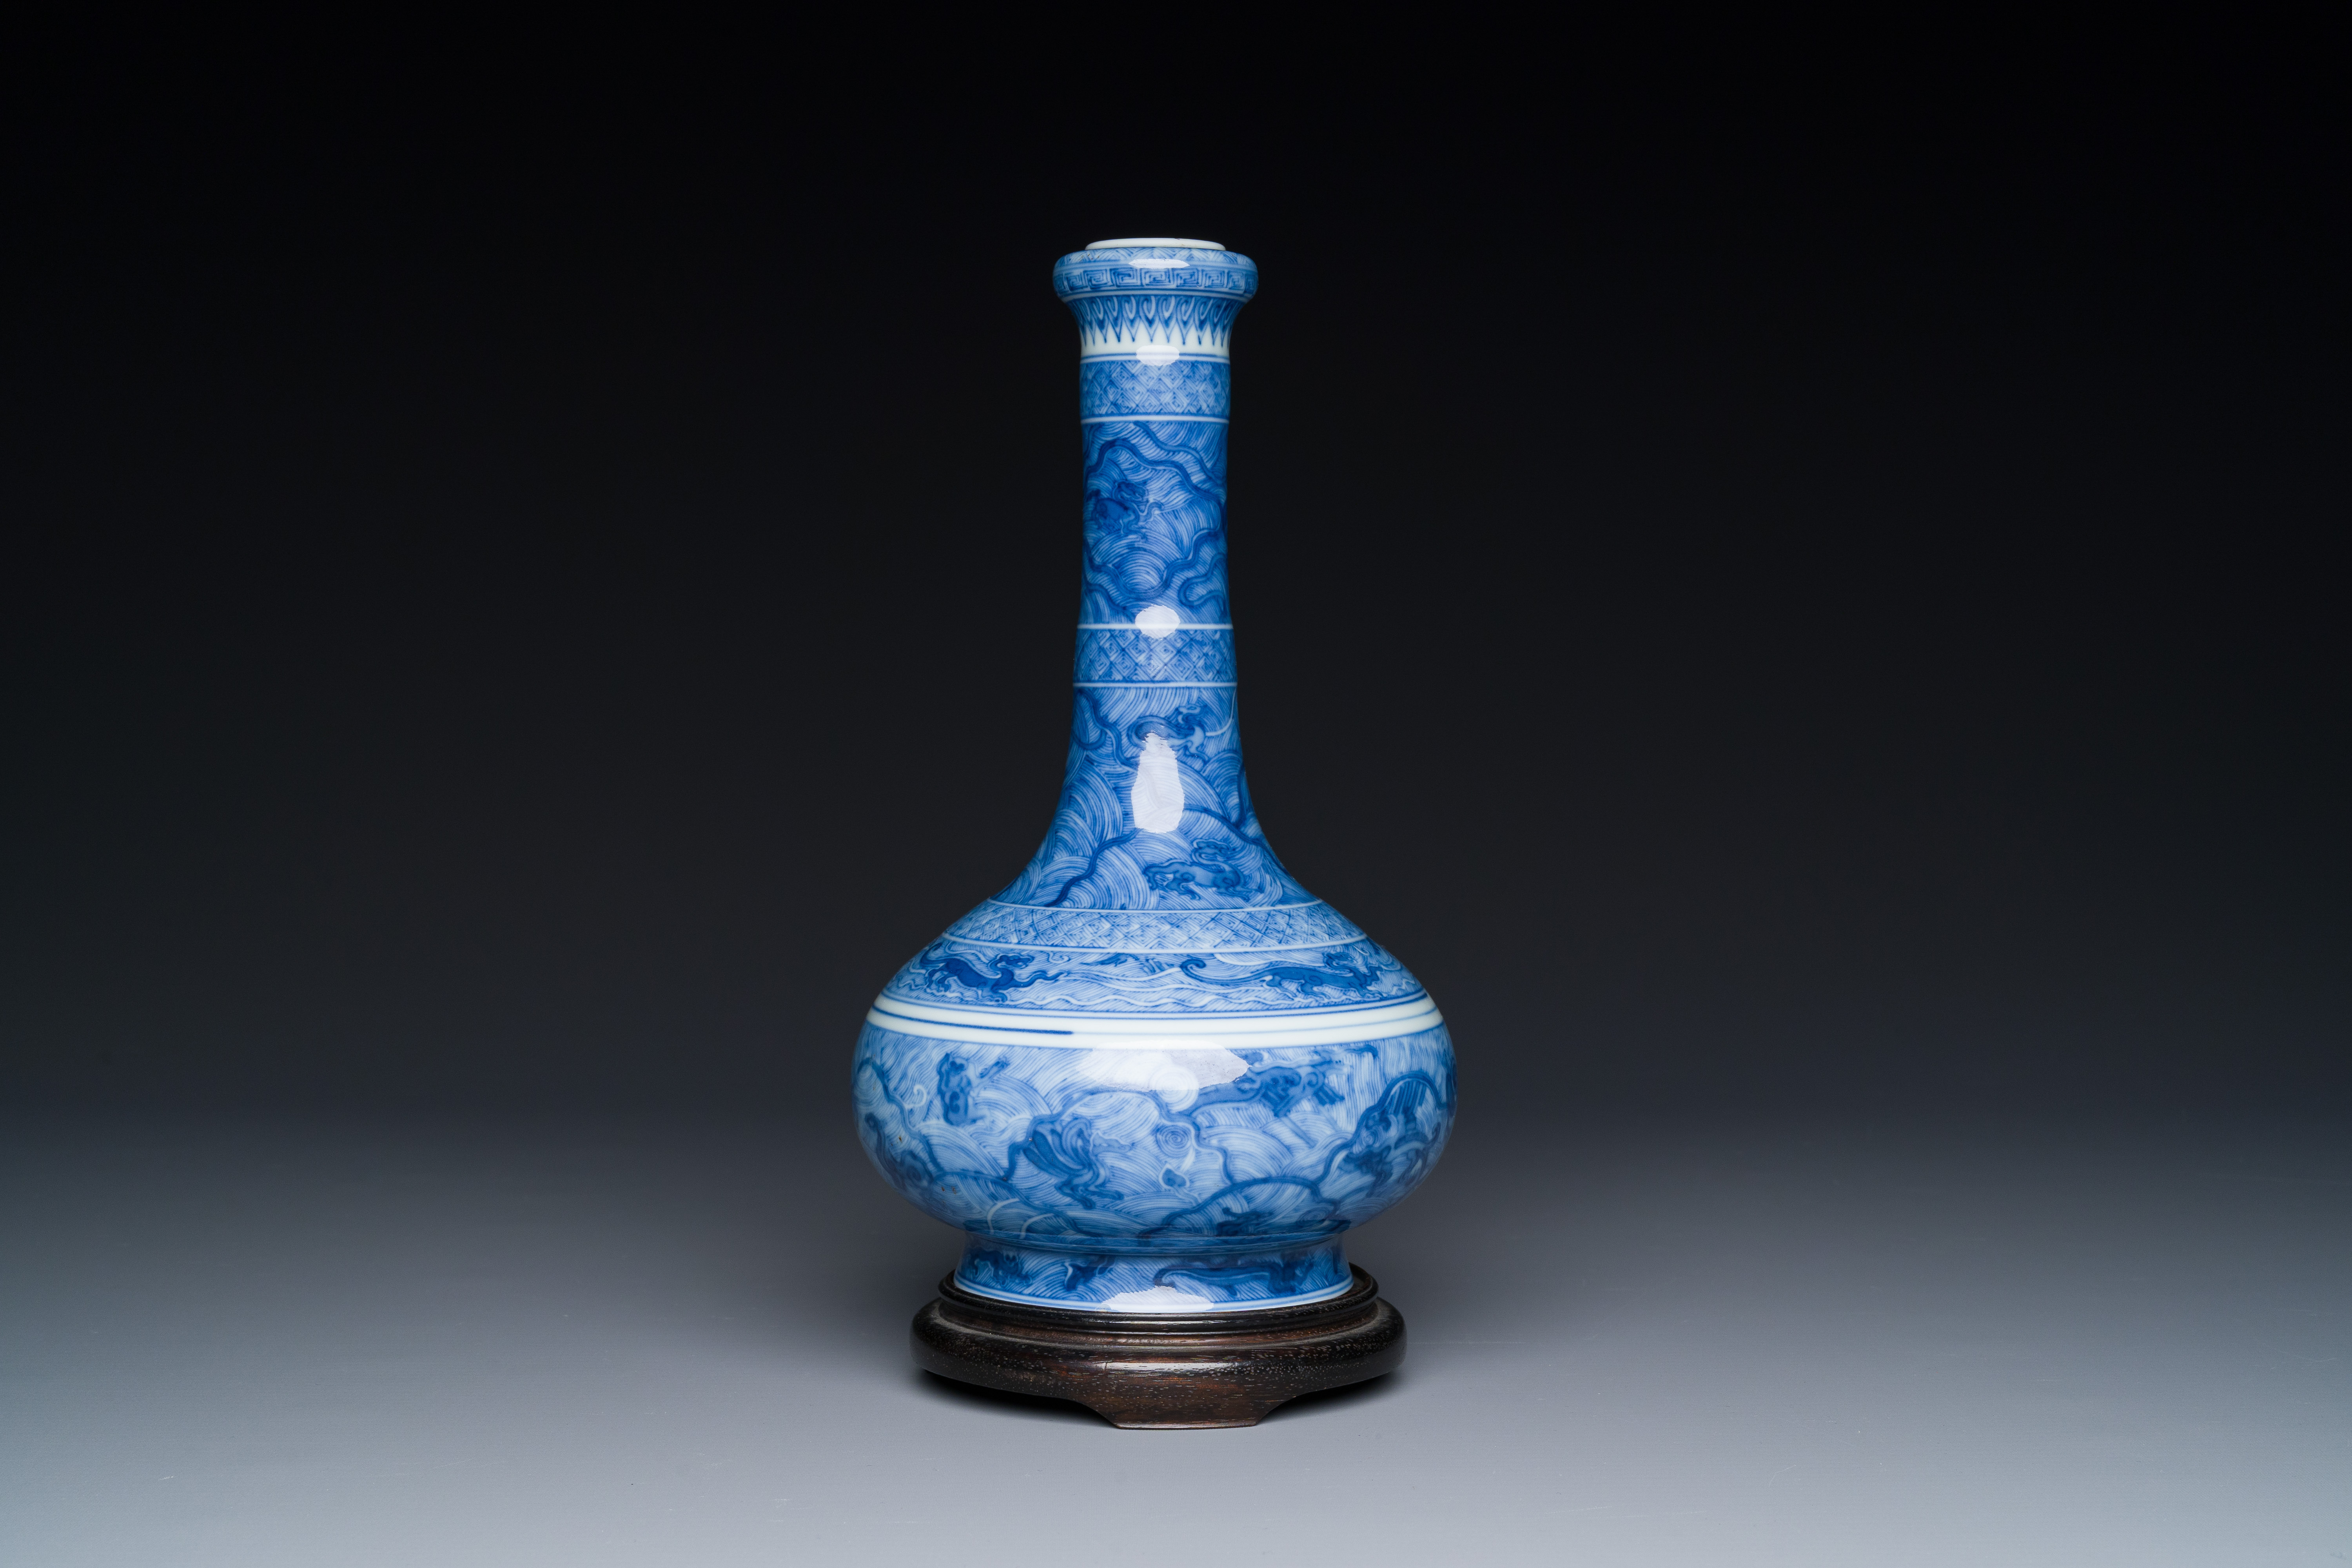 An exceptional Chinese blue and white 'mythic animals' garlic-mouth bottle vase on wooden stand, Kan